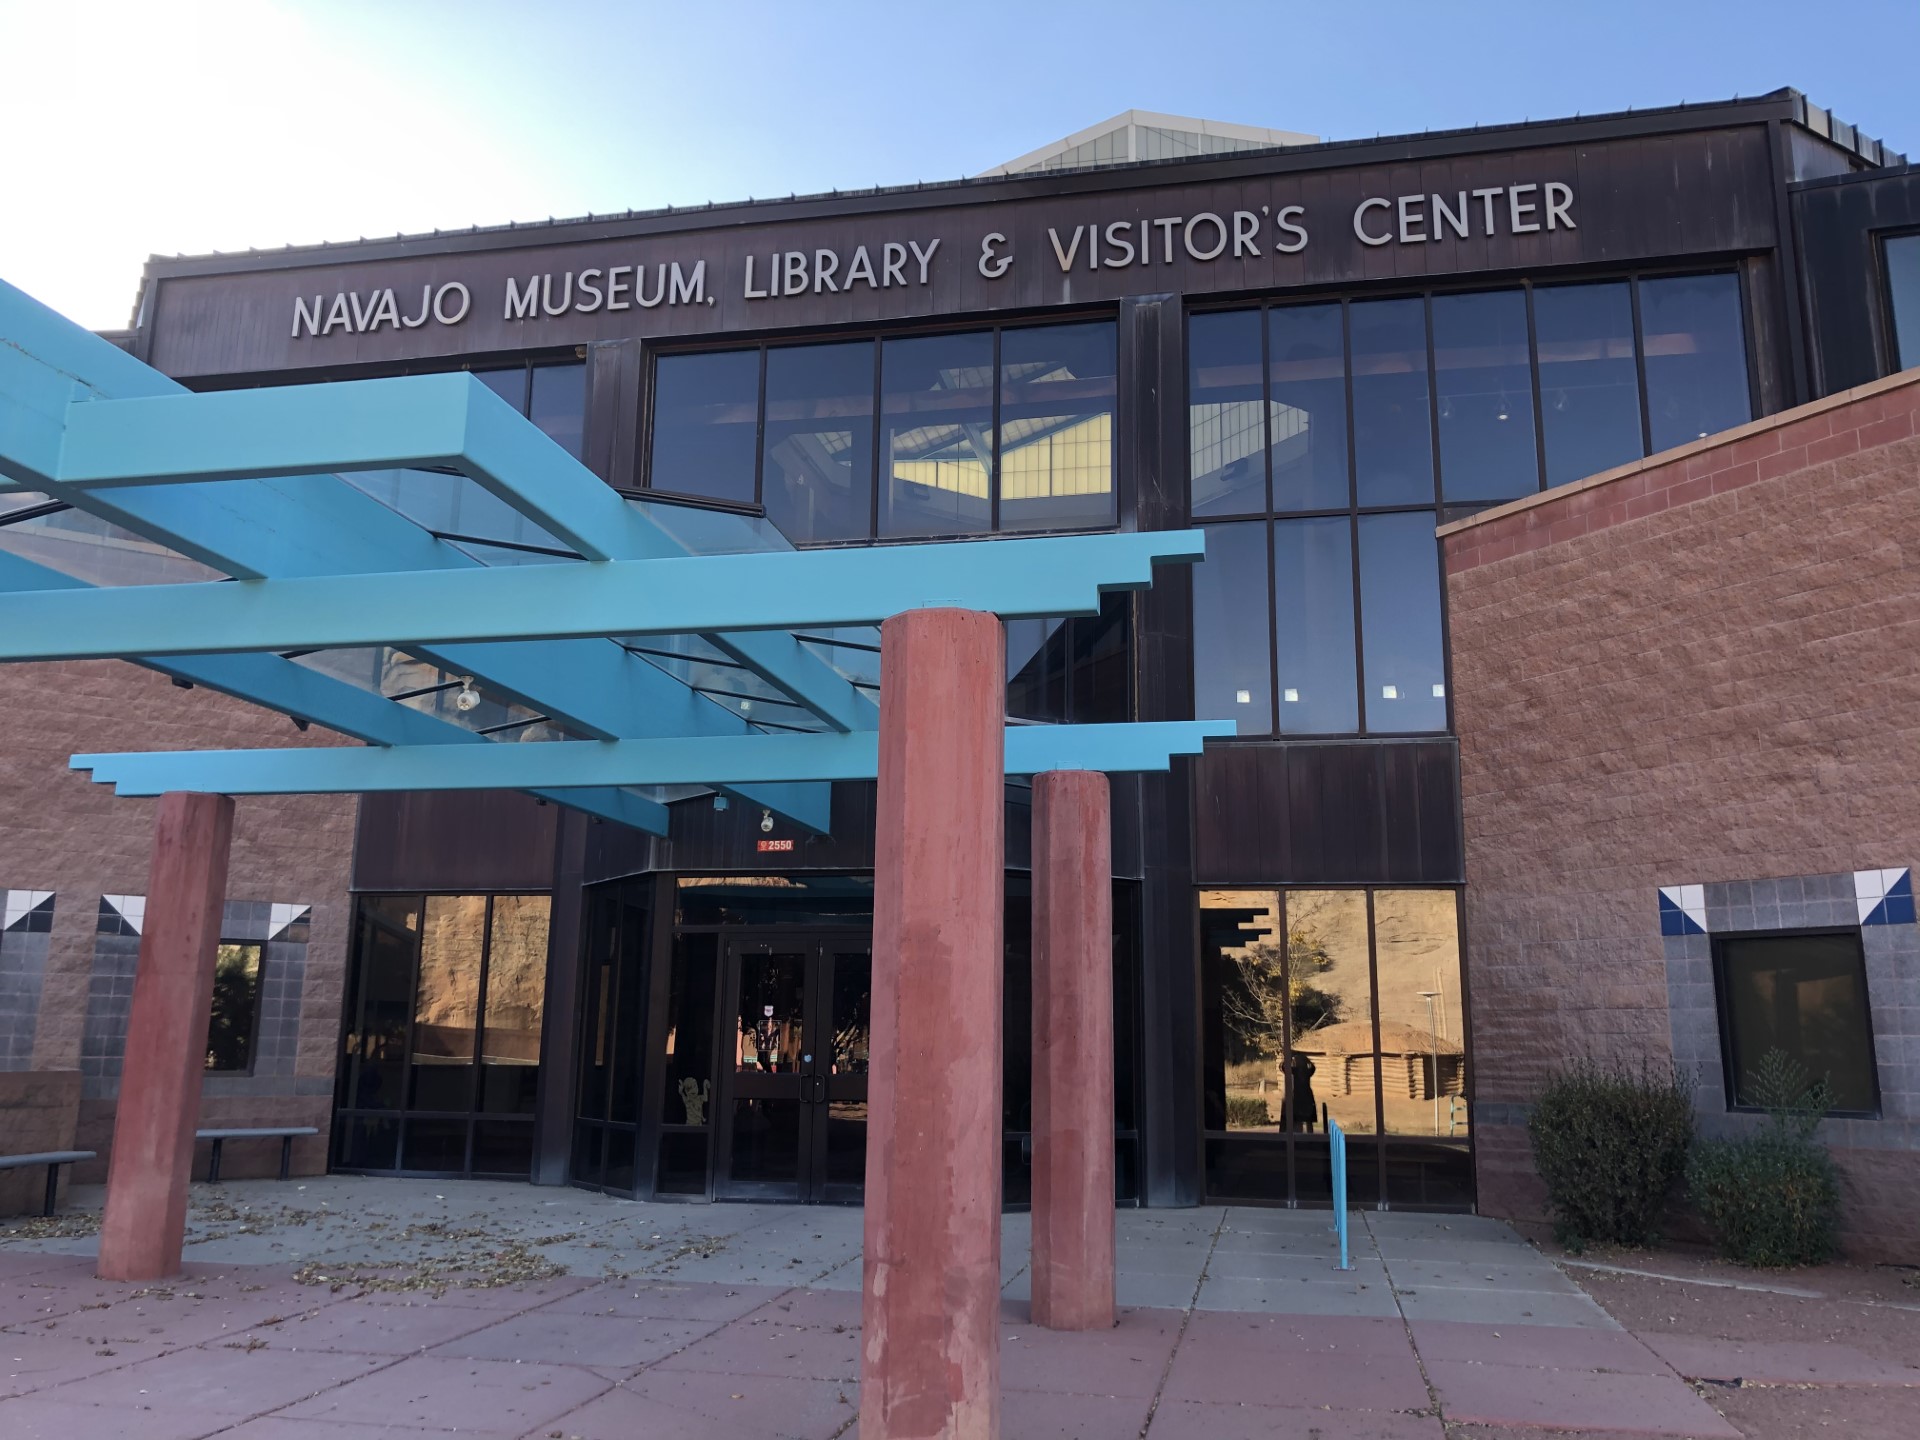 The next stop was the Navajo Museum, Library and Visitor’s Center in Window Rock.